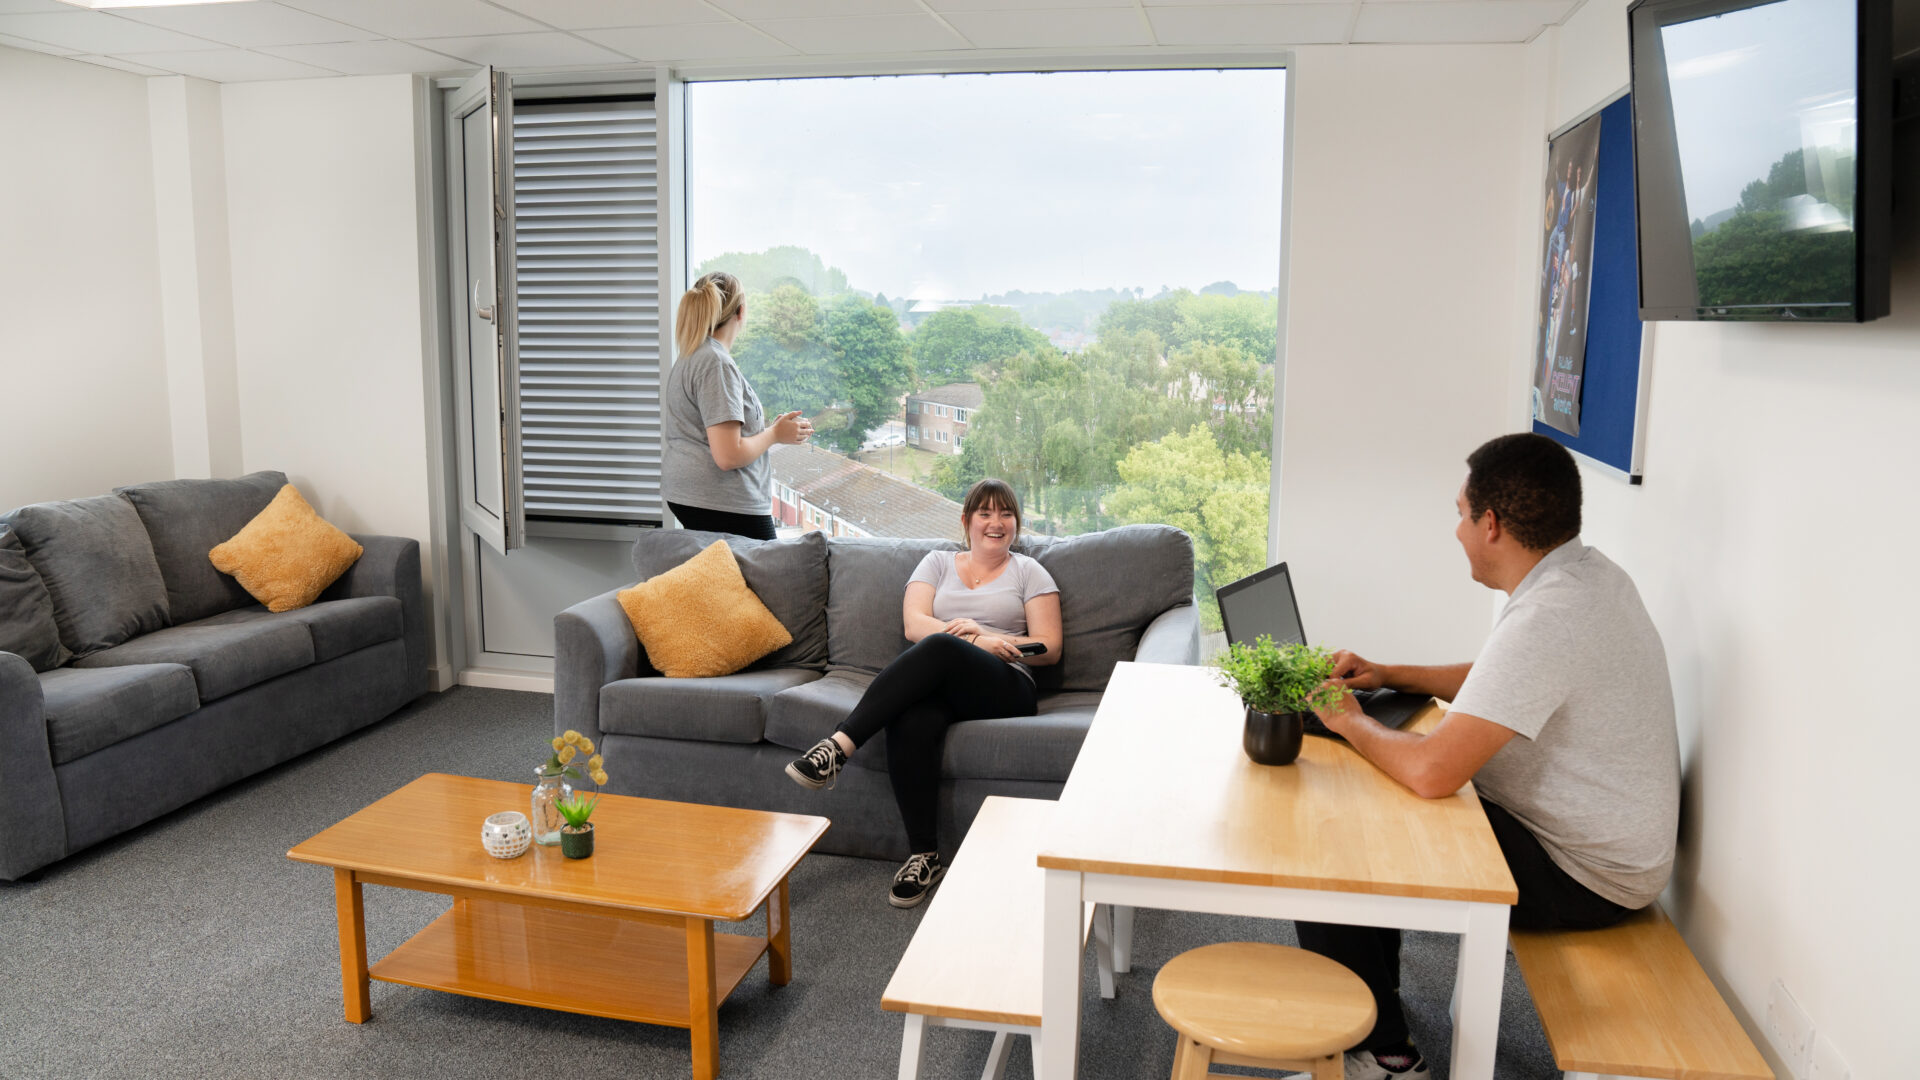 Students in the shared living room of Cofton Halls